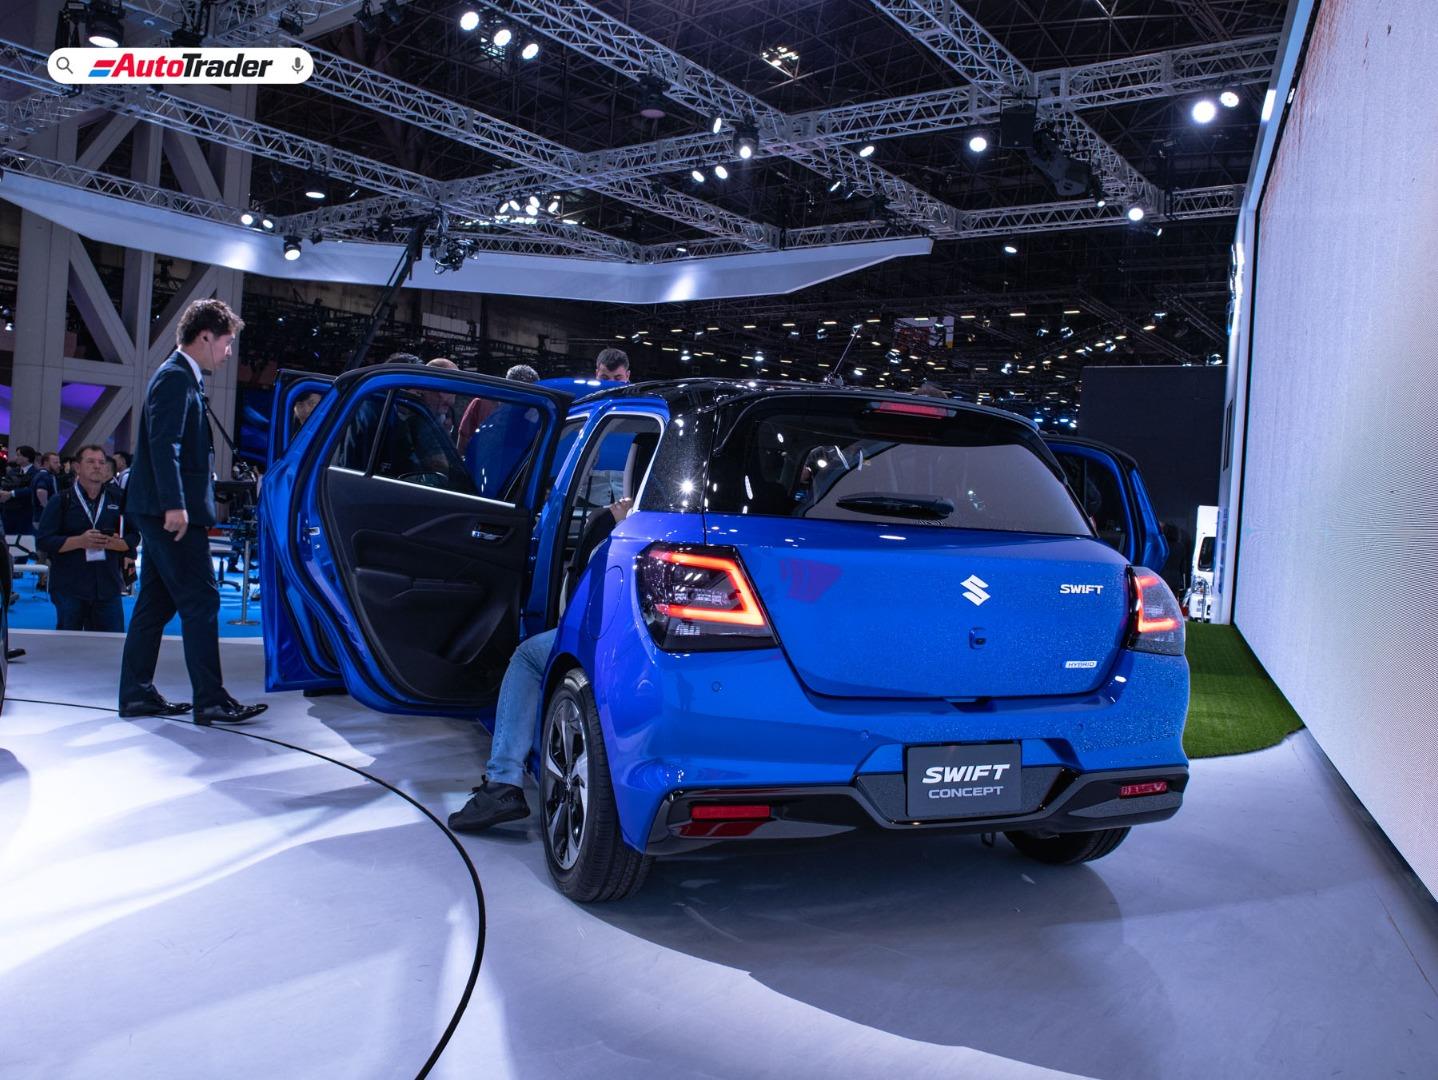 suzuki at japan mobility show - swift concept, evx and other vehicles shown!